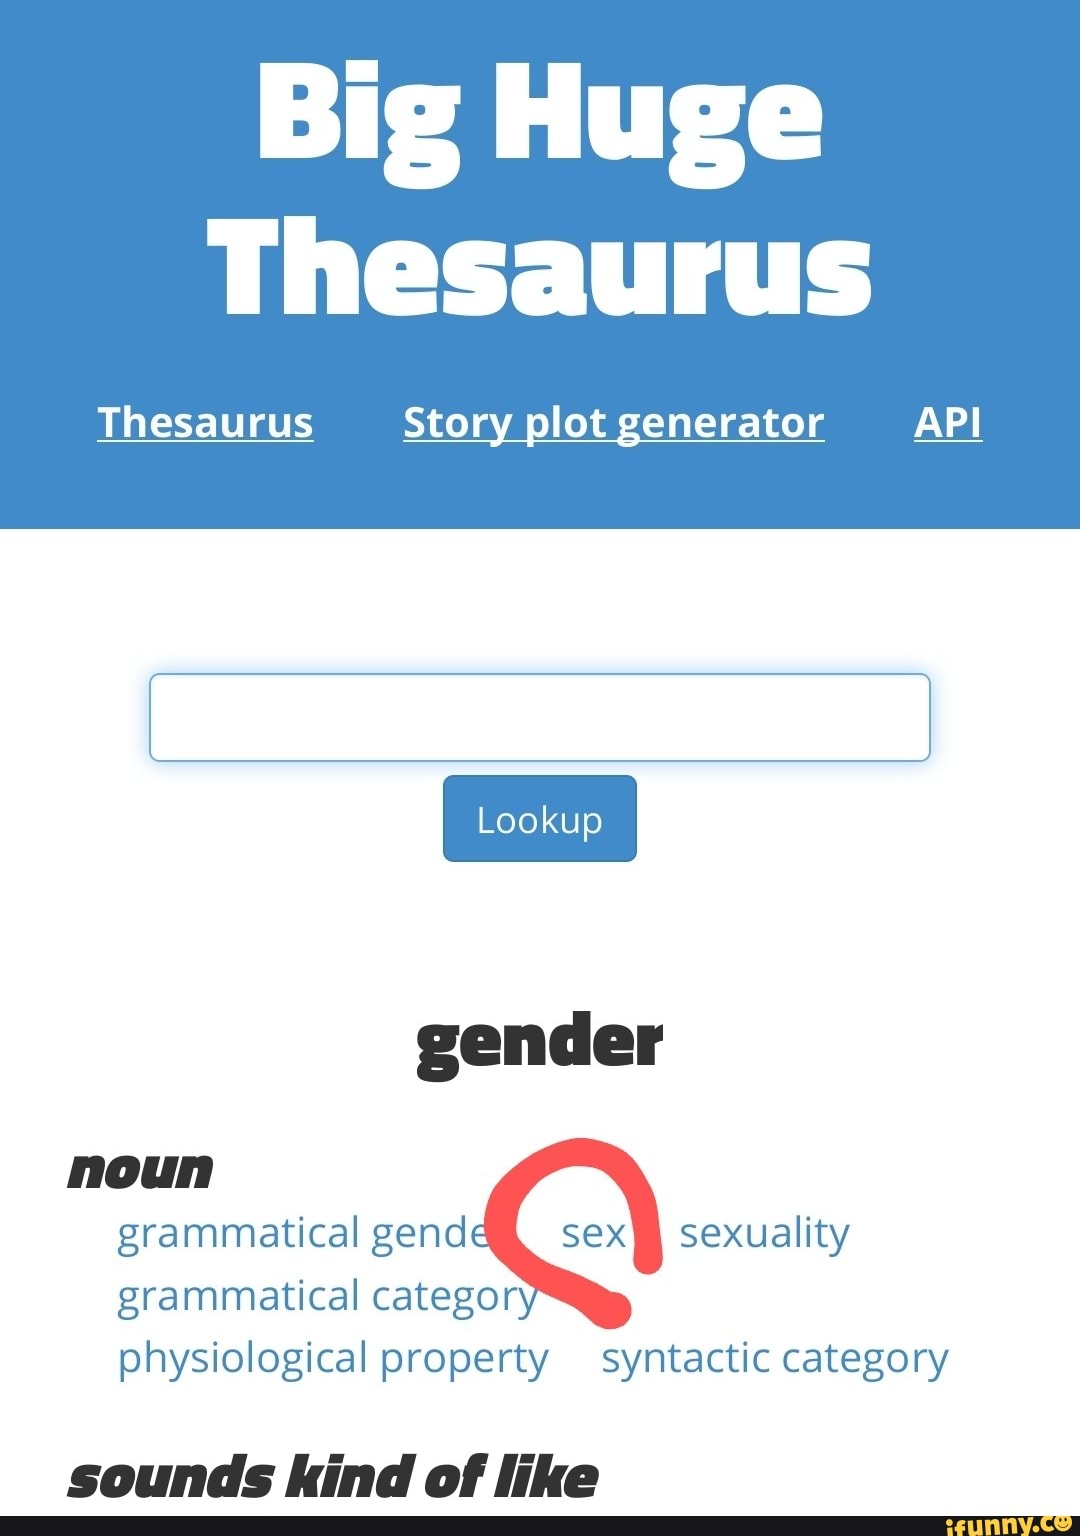 Big Huge Thesaurus Thesaurus Story plot generator API gender grammatical gend sex I sexuality grammatical category physiological property syntactic category noun sounds kind of like photo